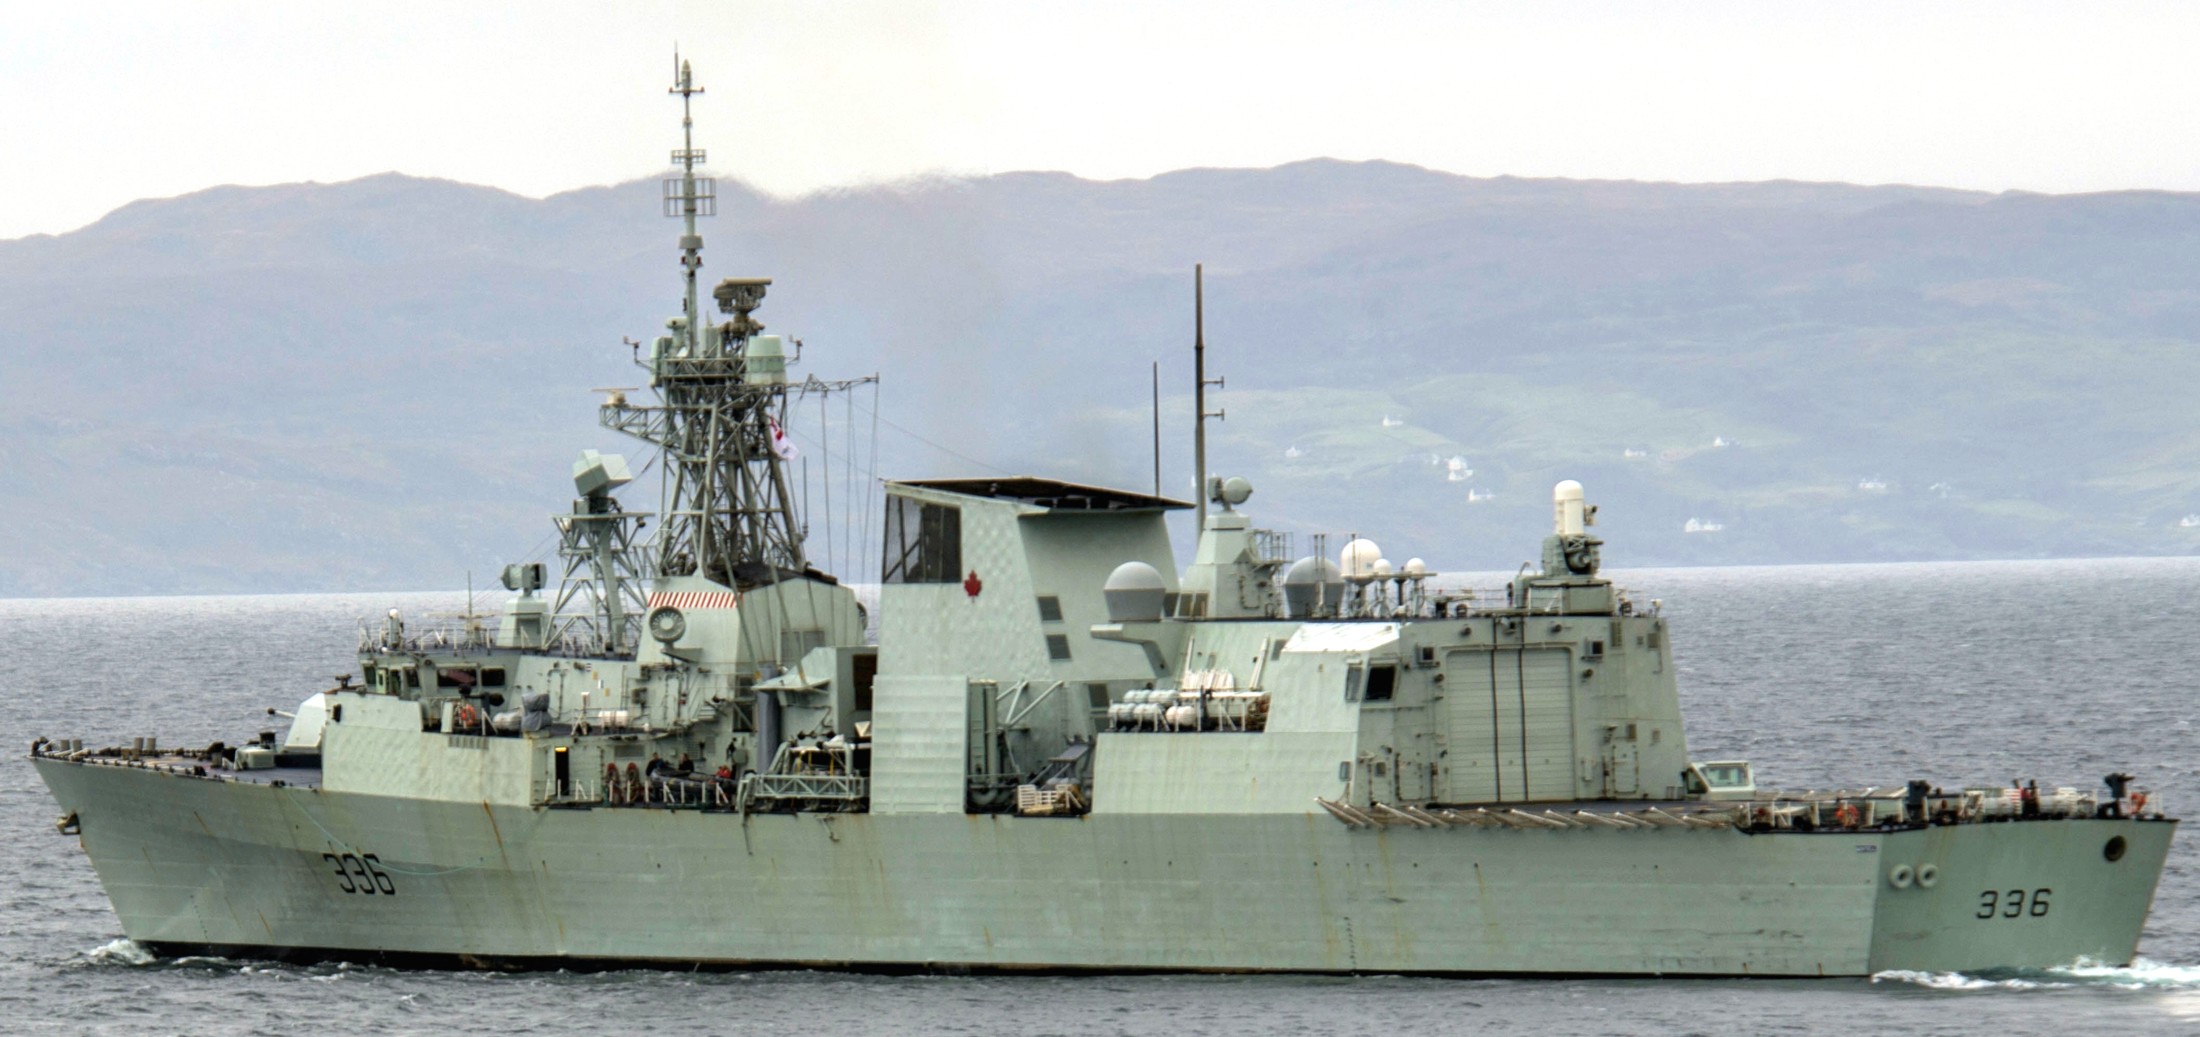 ffh-336 hmcs montreal halifax class helicopter patrol frigate ncsm royal canadian navy 03